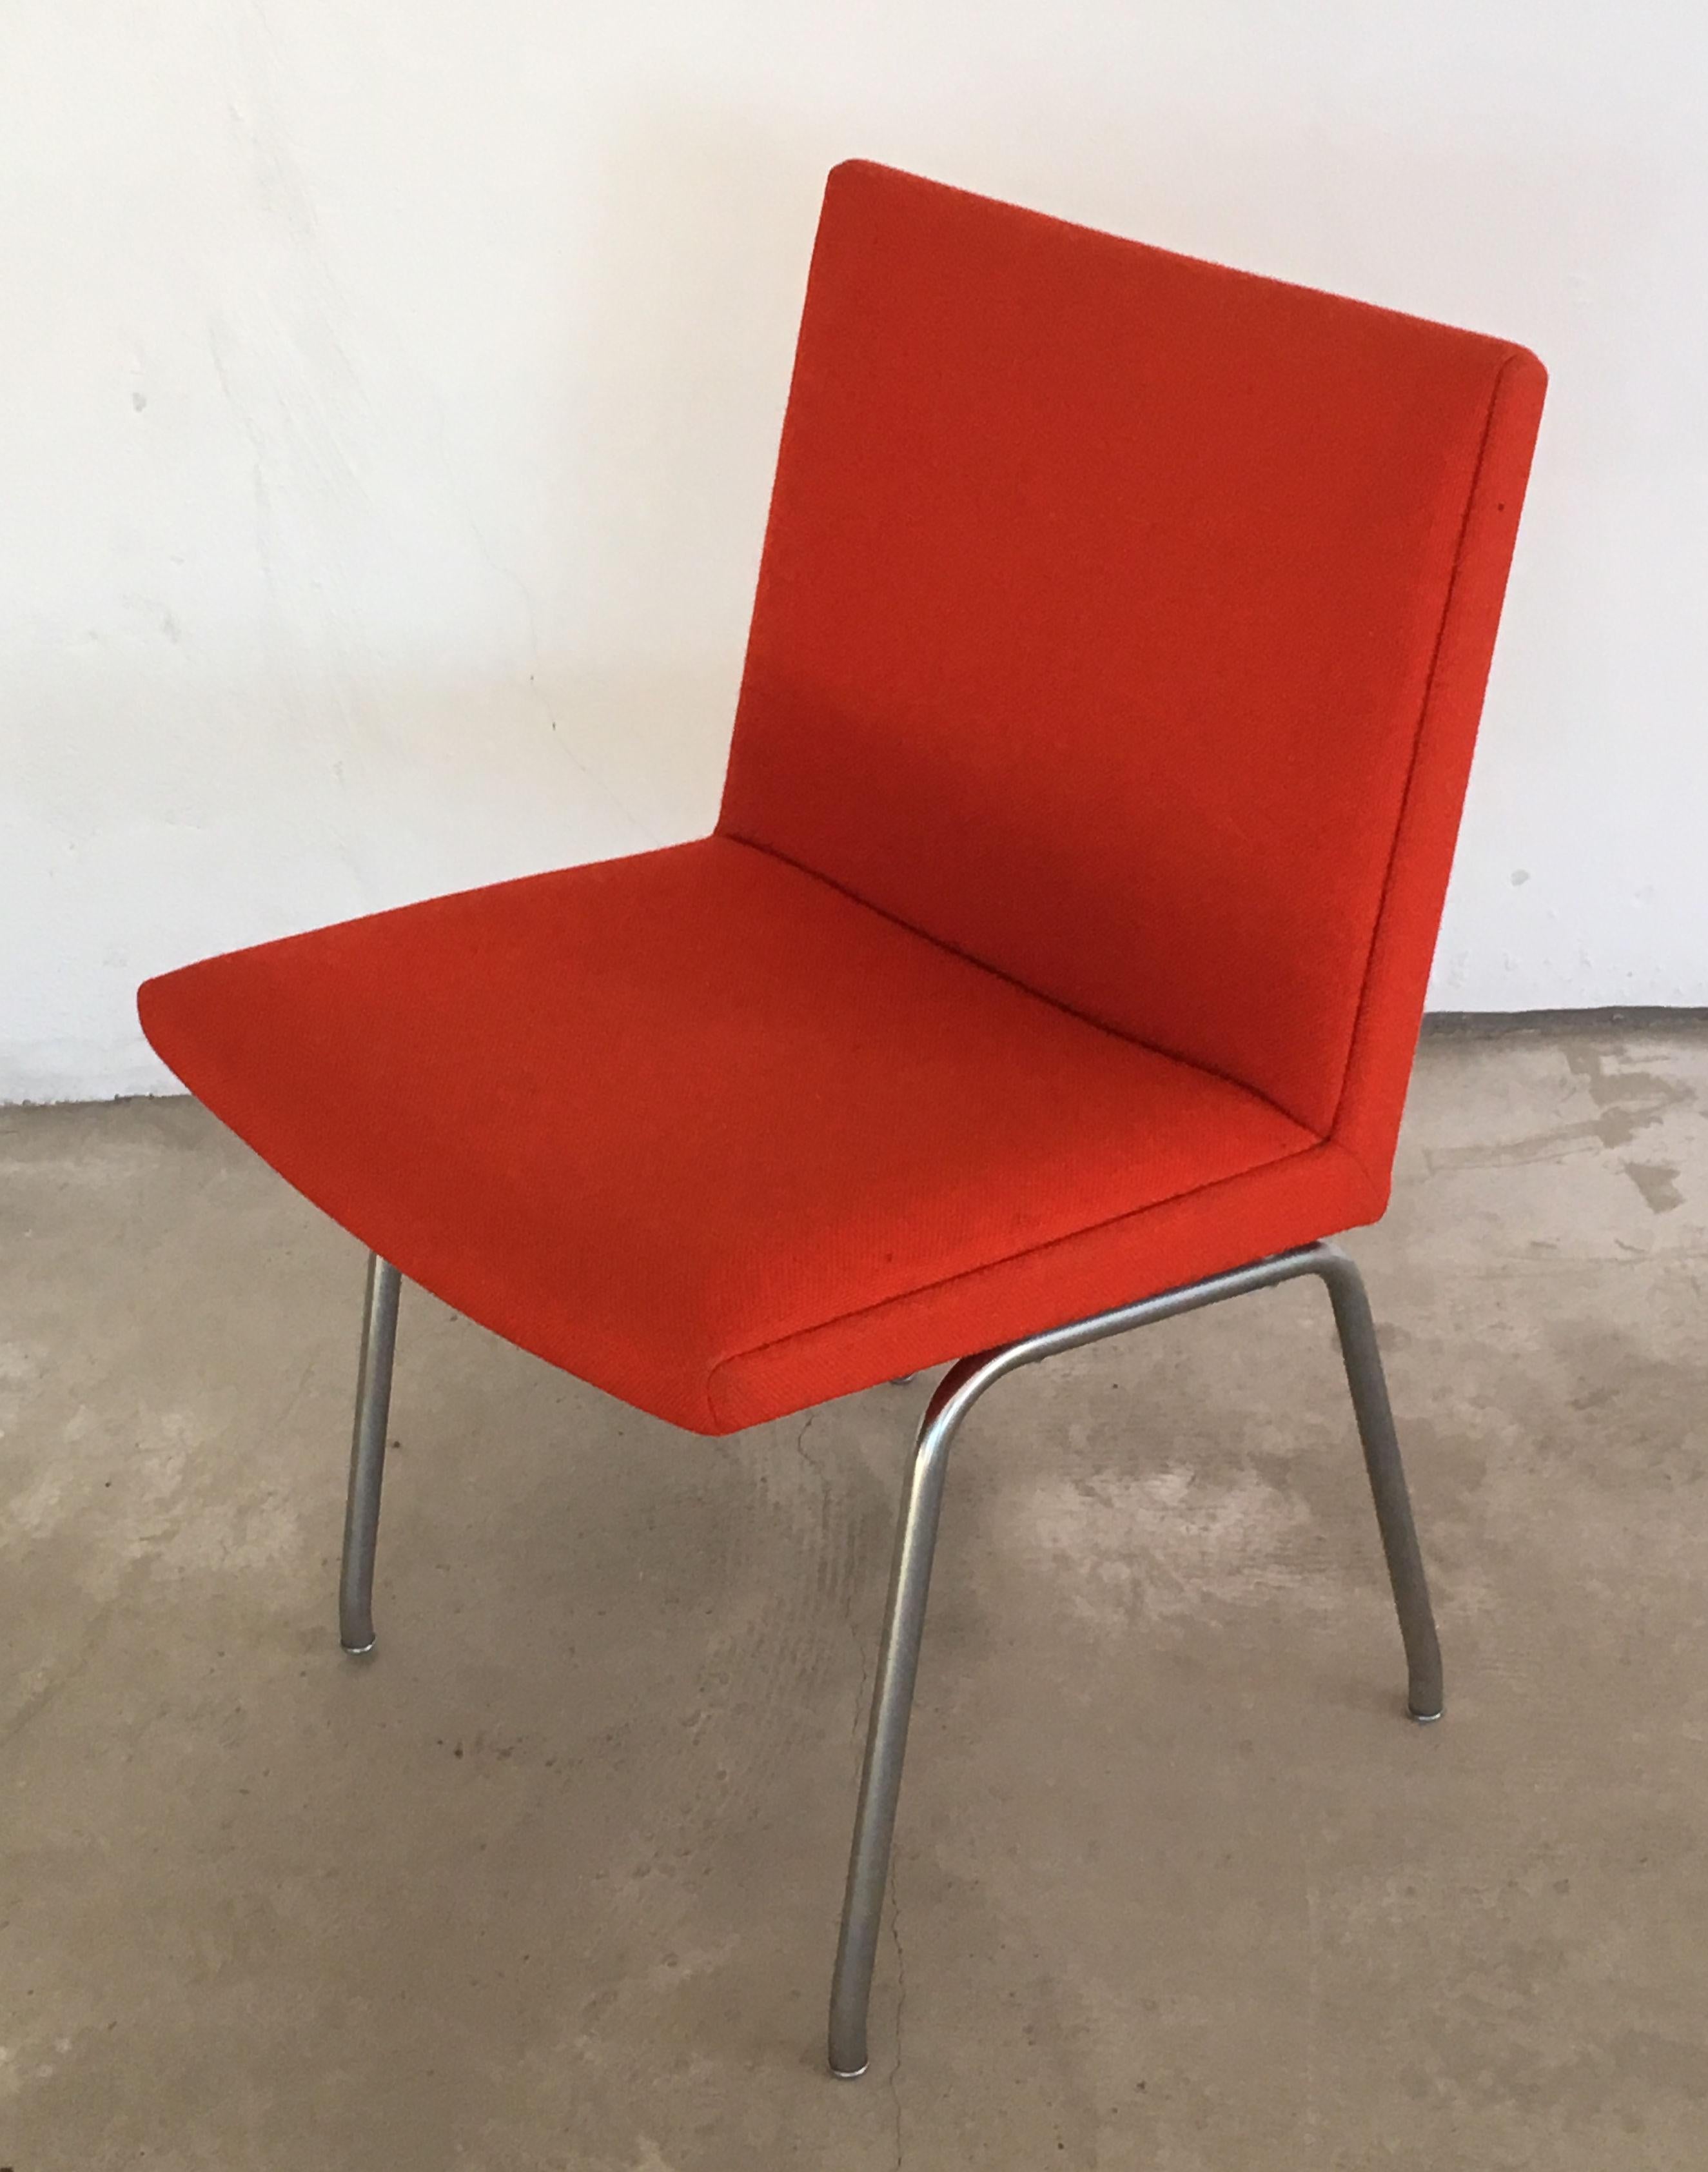 Hans Wegner set of 10 AP38 'Airport' chairs by A.P. Stolen.

The exceptional modern chairs designed in 1958, on tubular-steel frames with sharp triangle boomerang shaped details on both sides of each seat. 

Seats will be reupholstered with